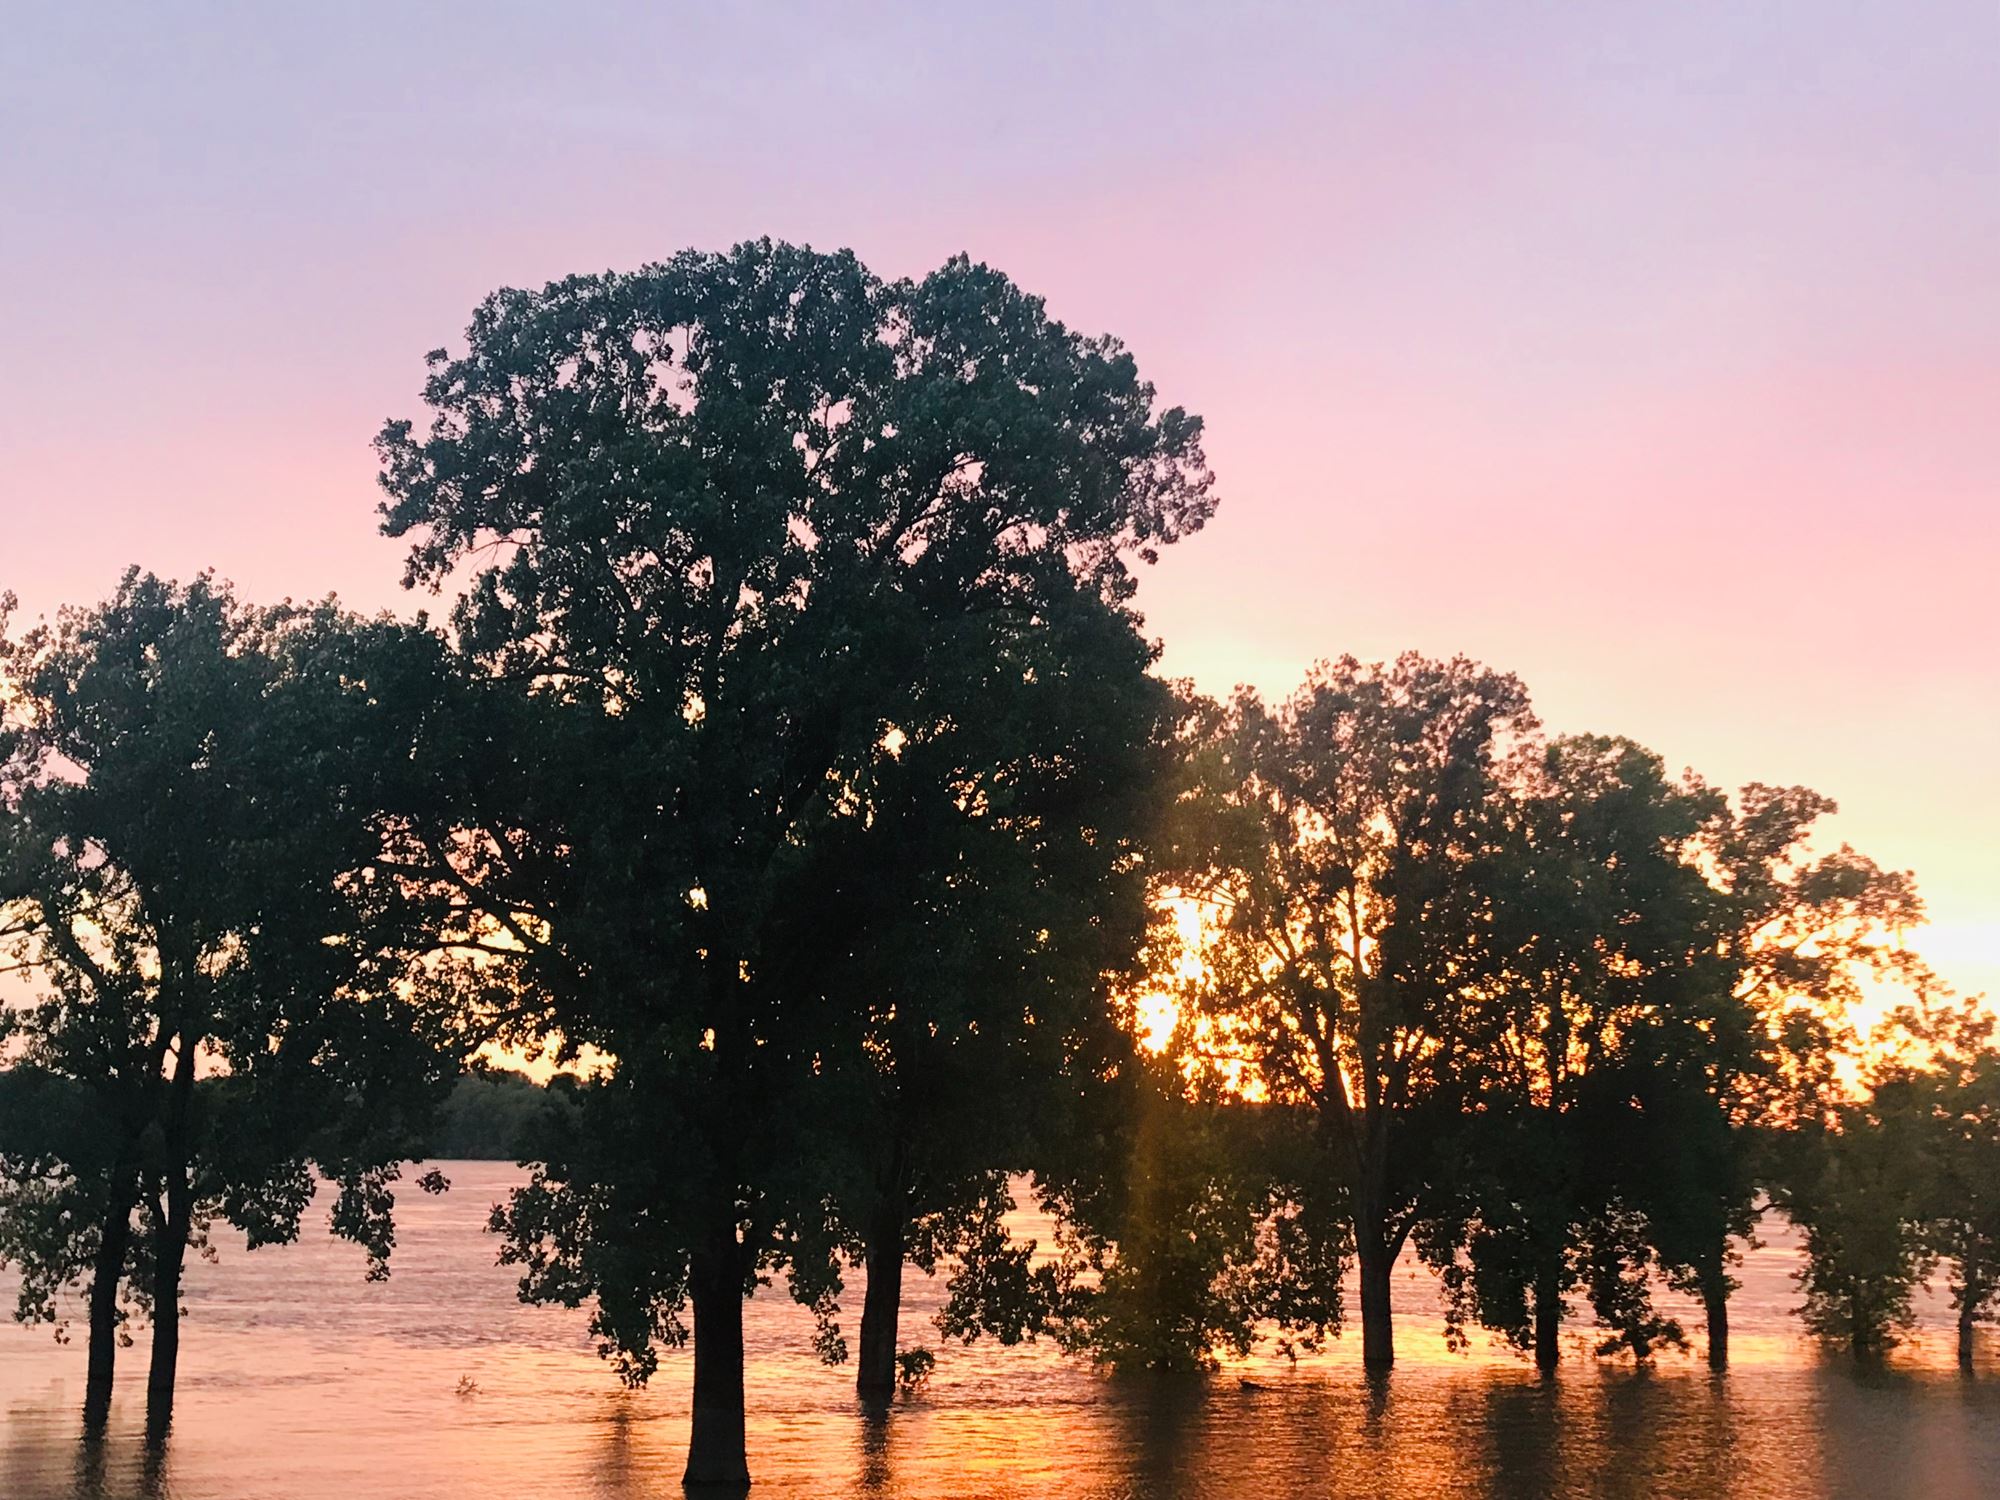 Oklahoma AgCredit donated $45,000 to flood relief efforts in 2019.